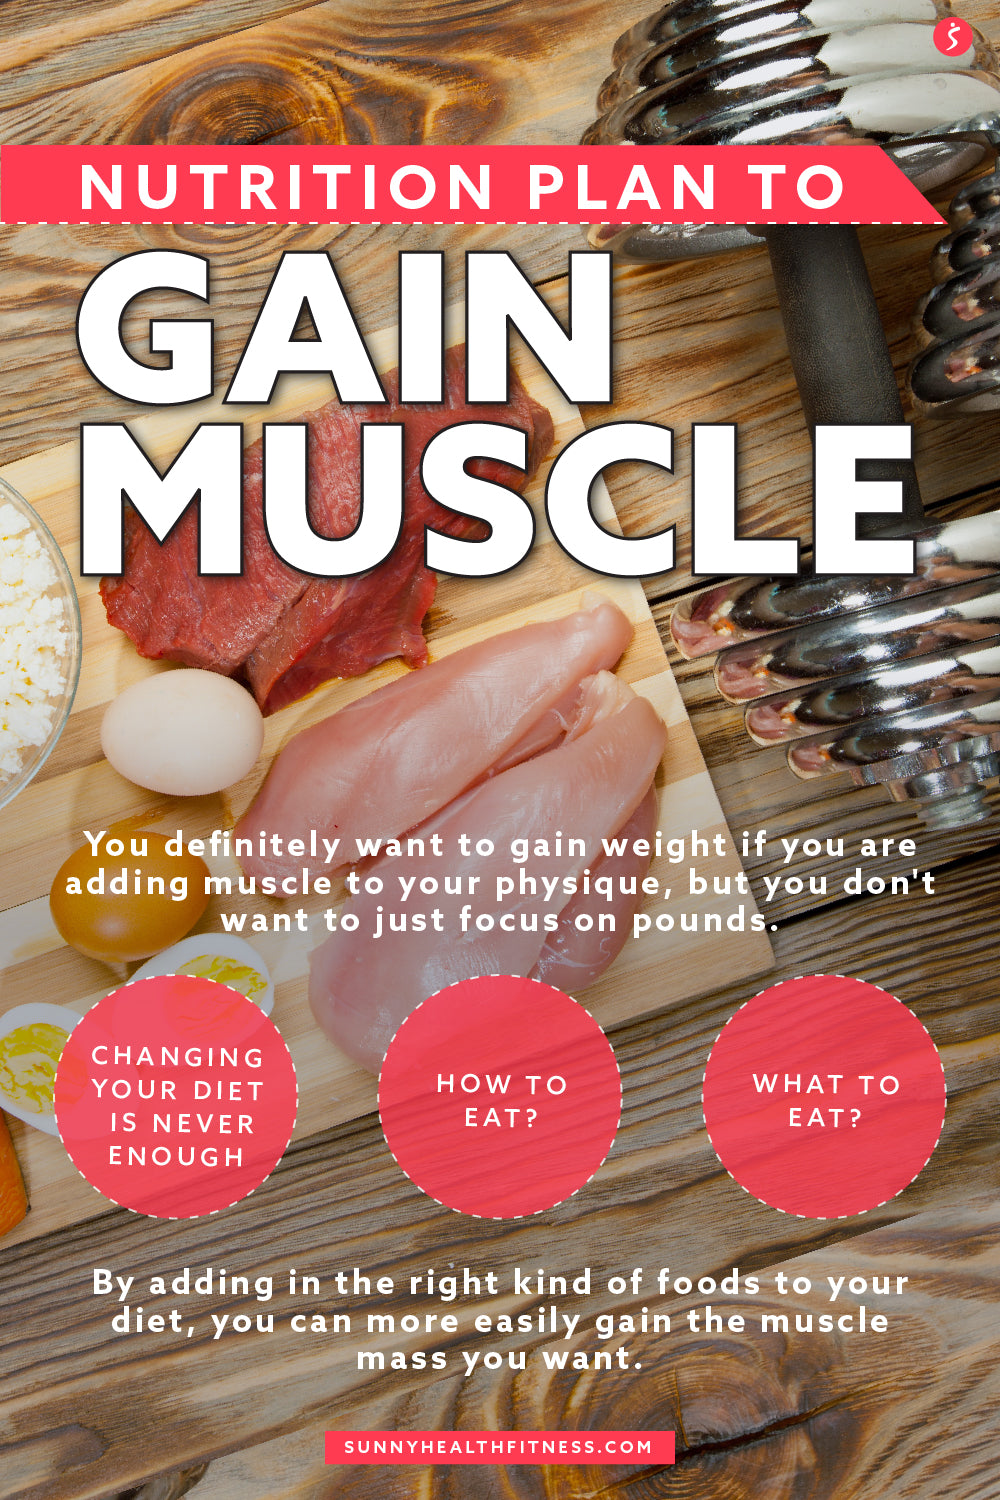 Diet Plan For Muscle Gain - Nutrabay Magazine